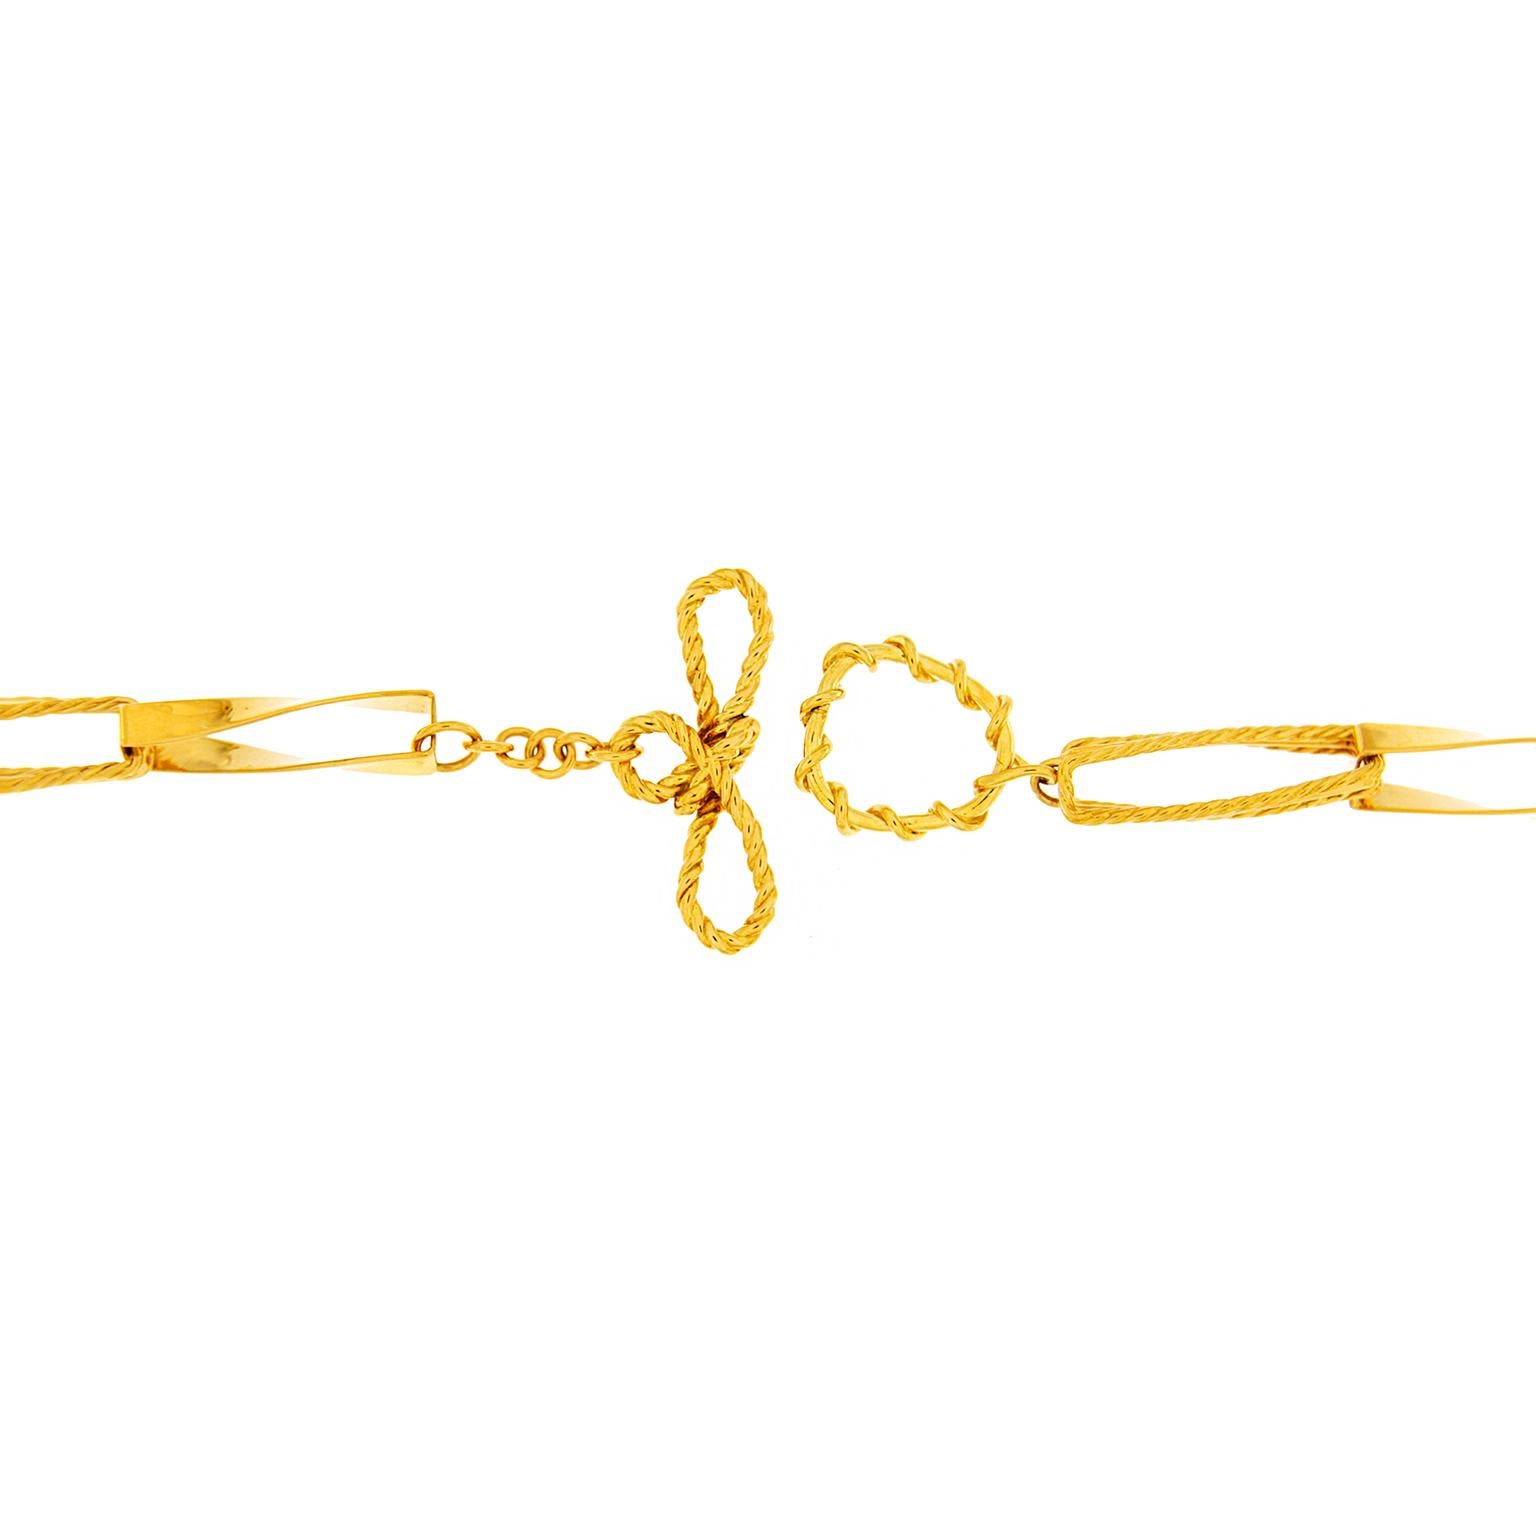 Warm-hued metal of 18k yellow gold forms interlaced ribbons. Connected in sections, each element is a flat slender overlapped ribbon. An alternating pattern of sleek metal followed by textured creates visual interest. The result is the impression of